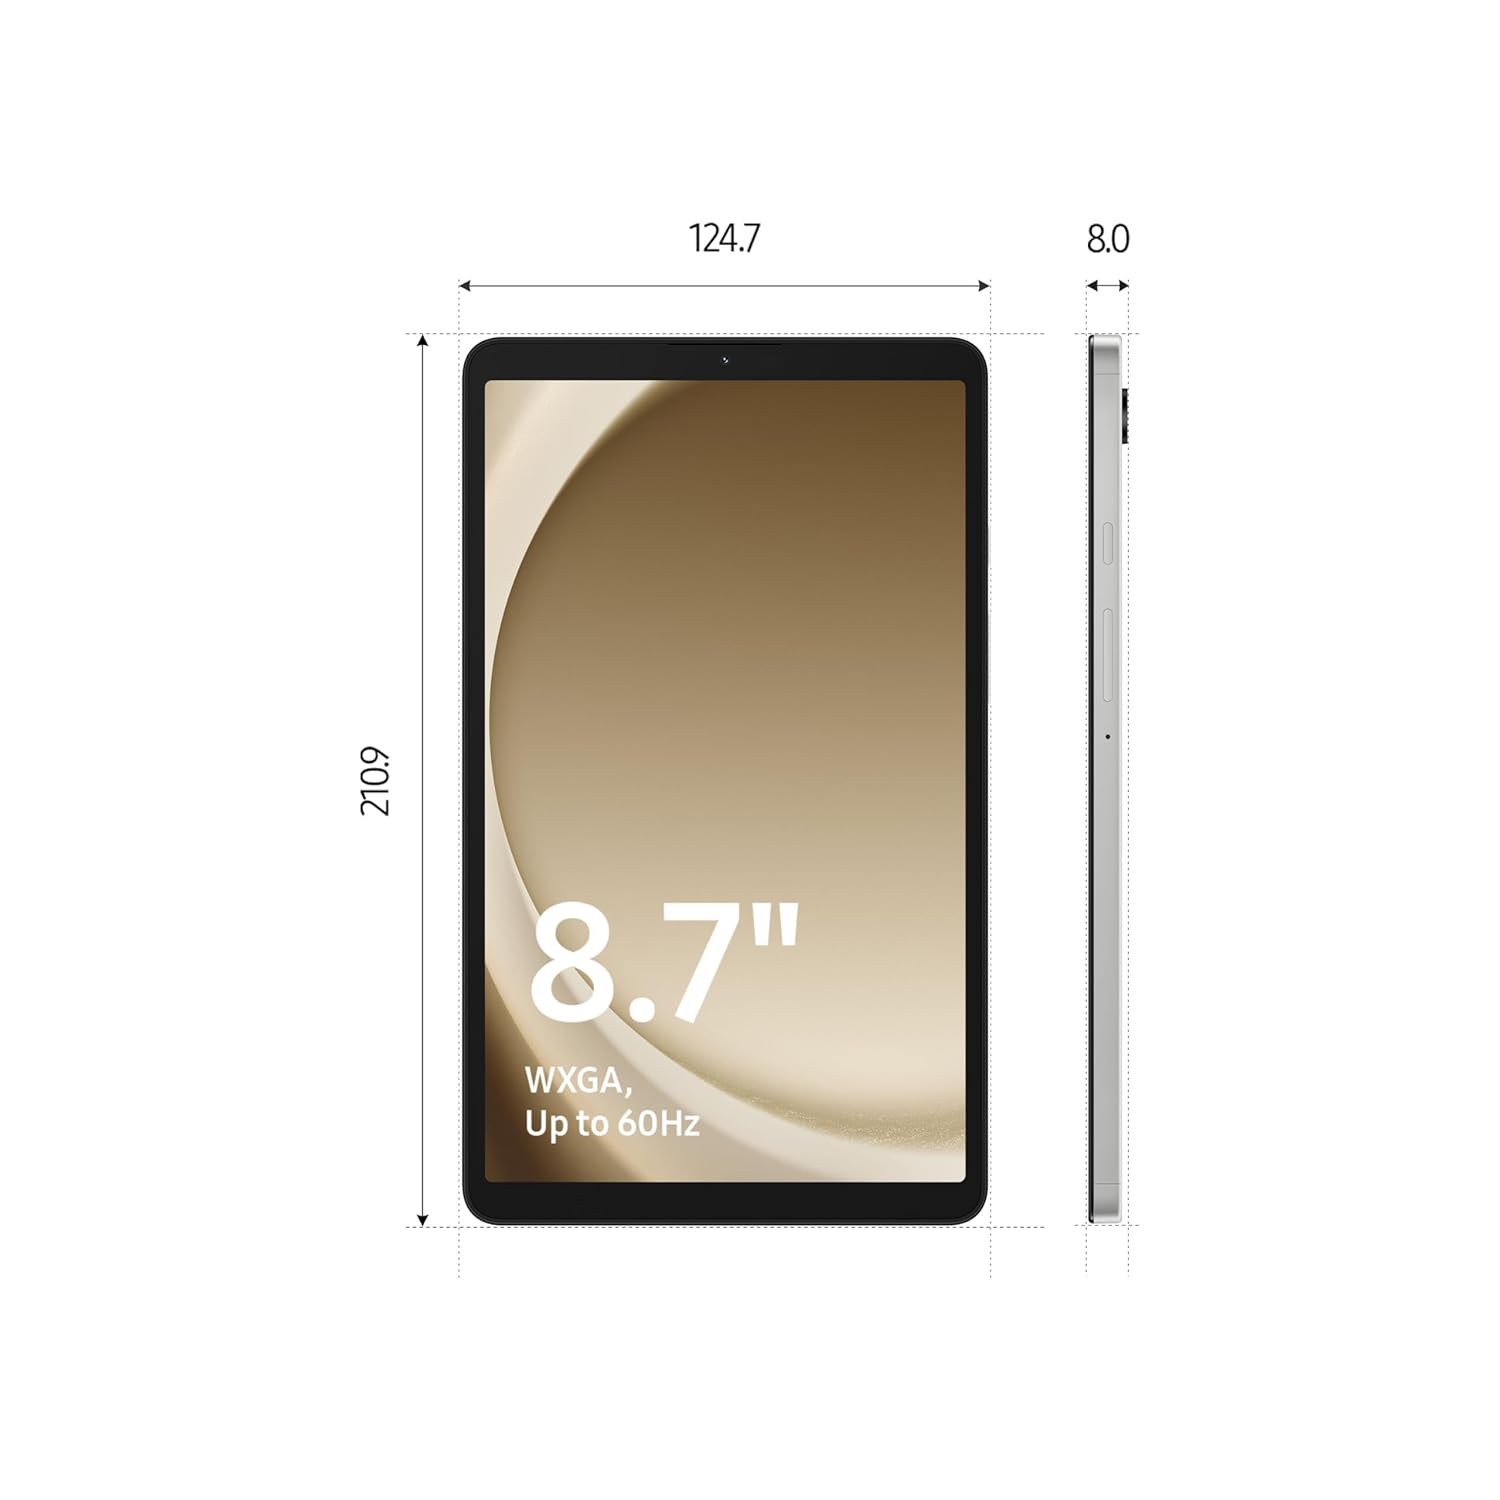 Samsung Galaxy Tab A9 Plus specs allegedly confirmed ahead of launch -   News